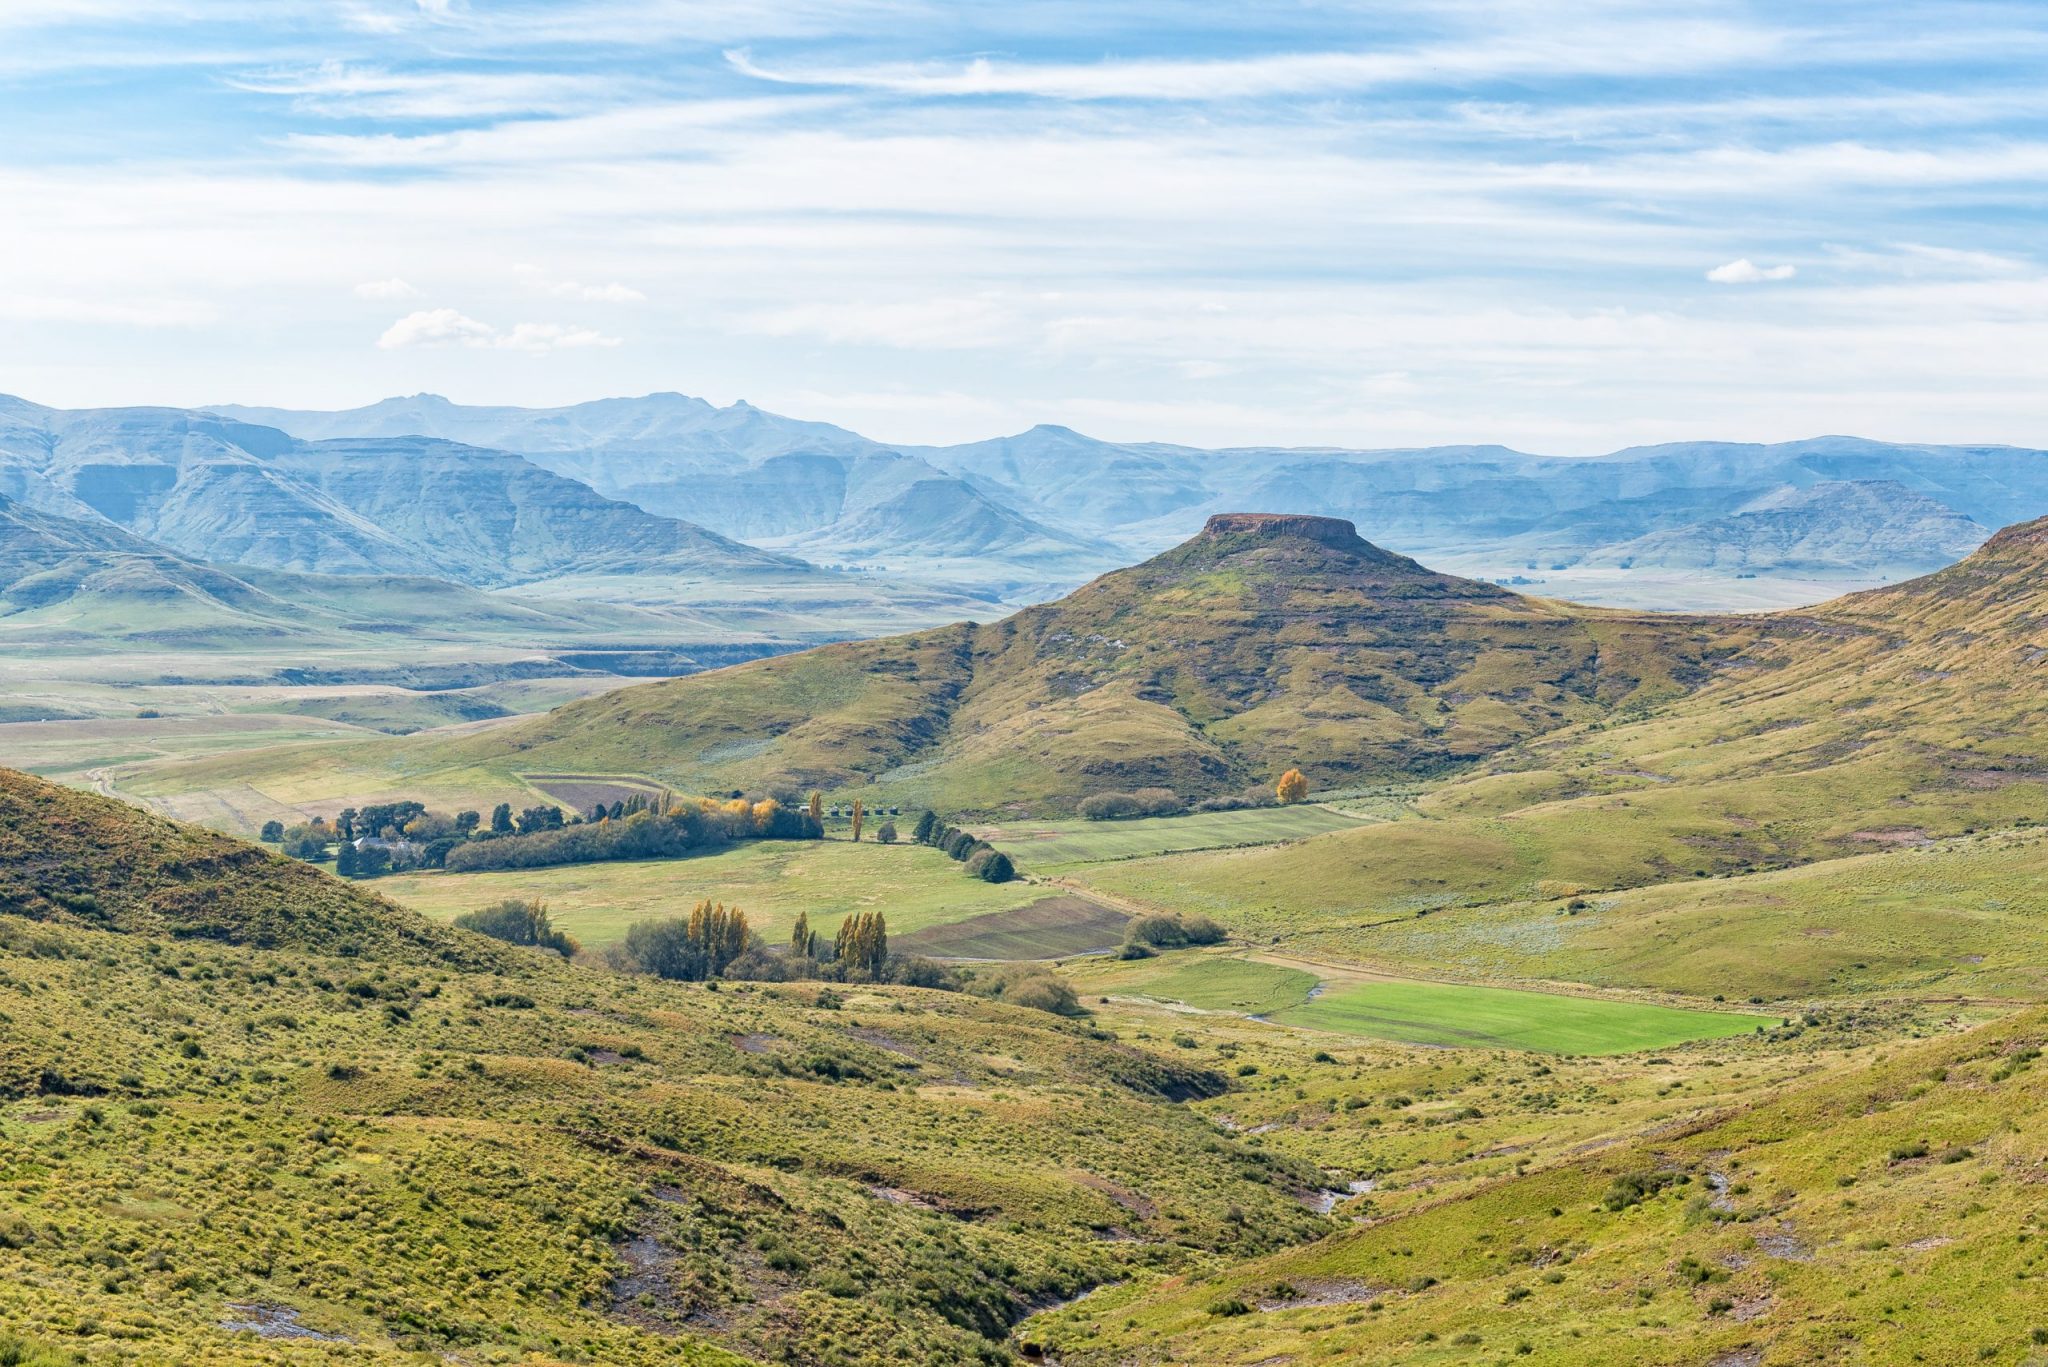 Eastern view from the historic Jouberts Pass at Lady Grey in the Eastern Cape Province